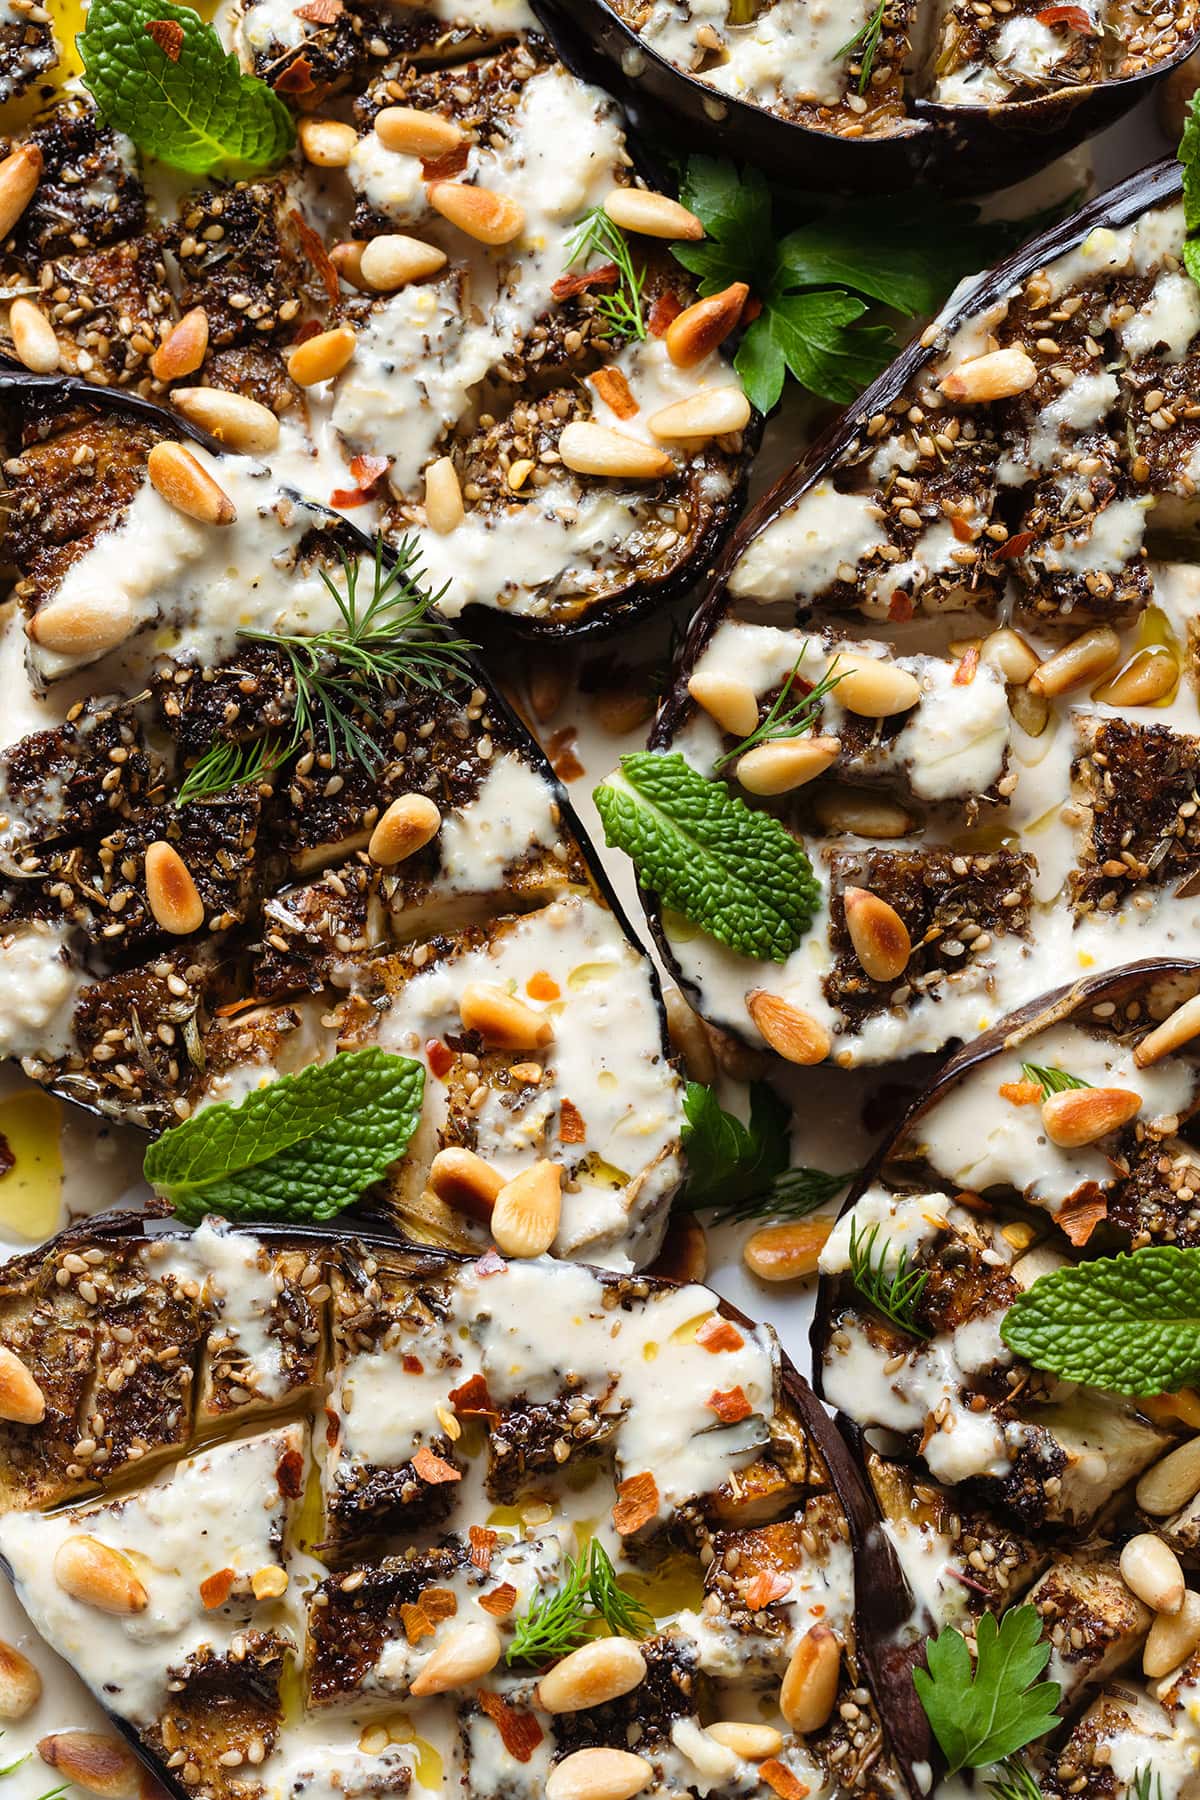 Halved roasted eggplant with spices, tahini sauce, herbs, and pine nuts.